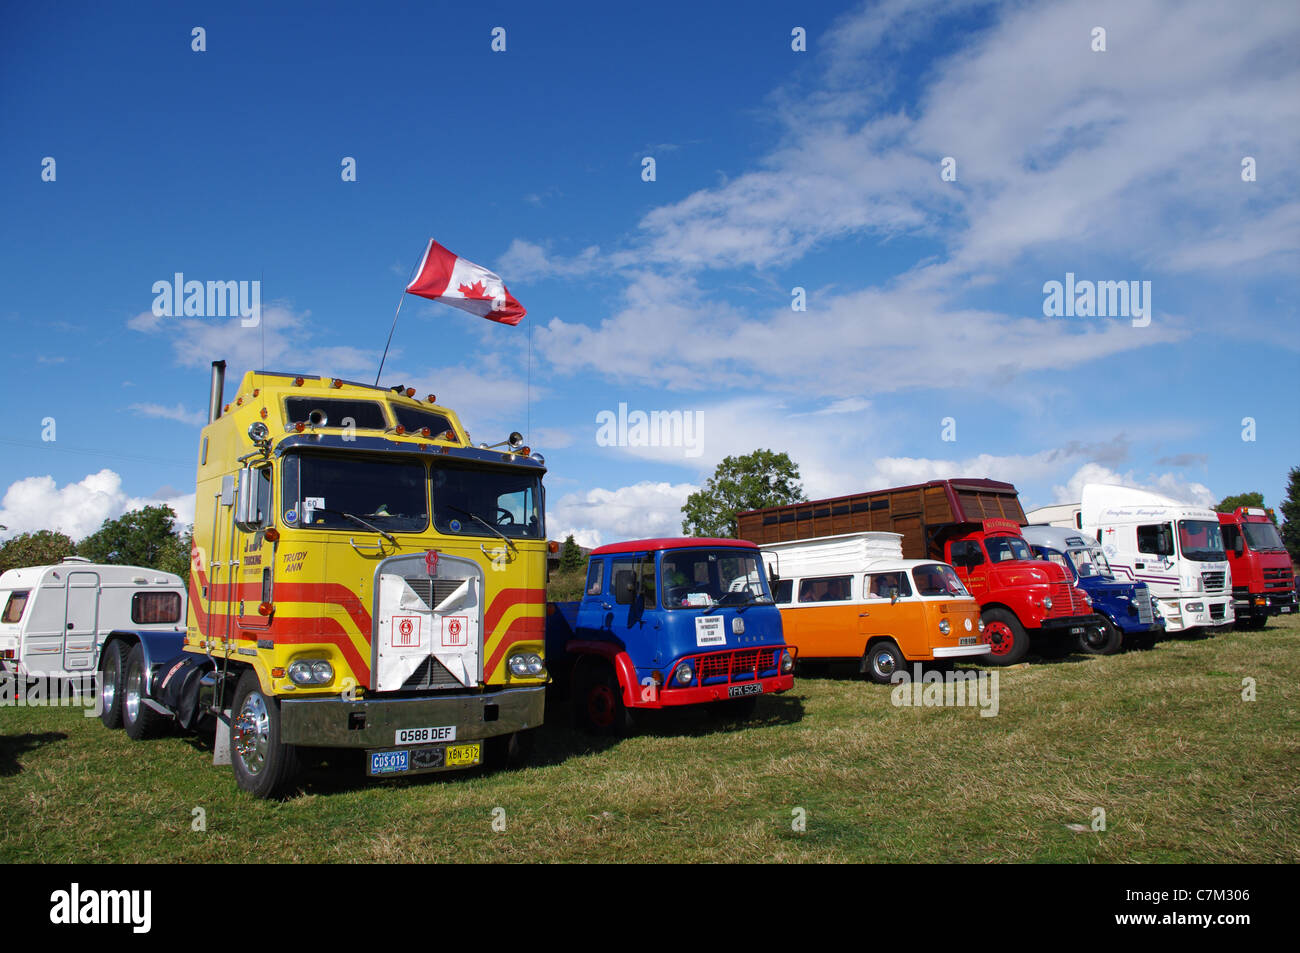 Line-up of classic trucks and vans at Stoke Prior Steam Rally. Sunny day,  blue sky, bright paintwork. Canadian Kenworth closest Stock Photo - Alamy